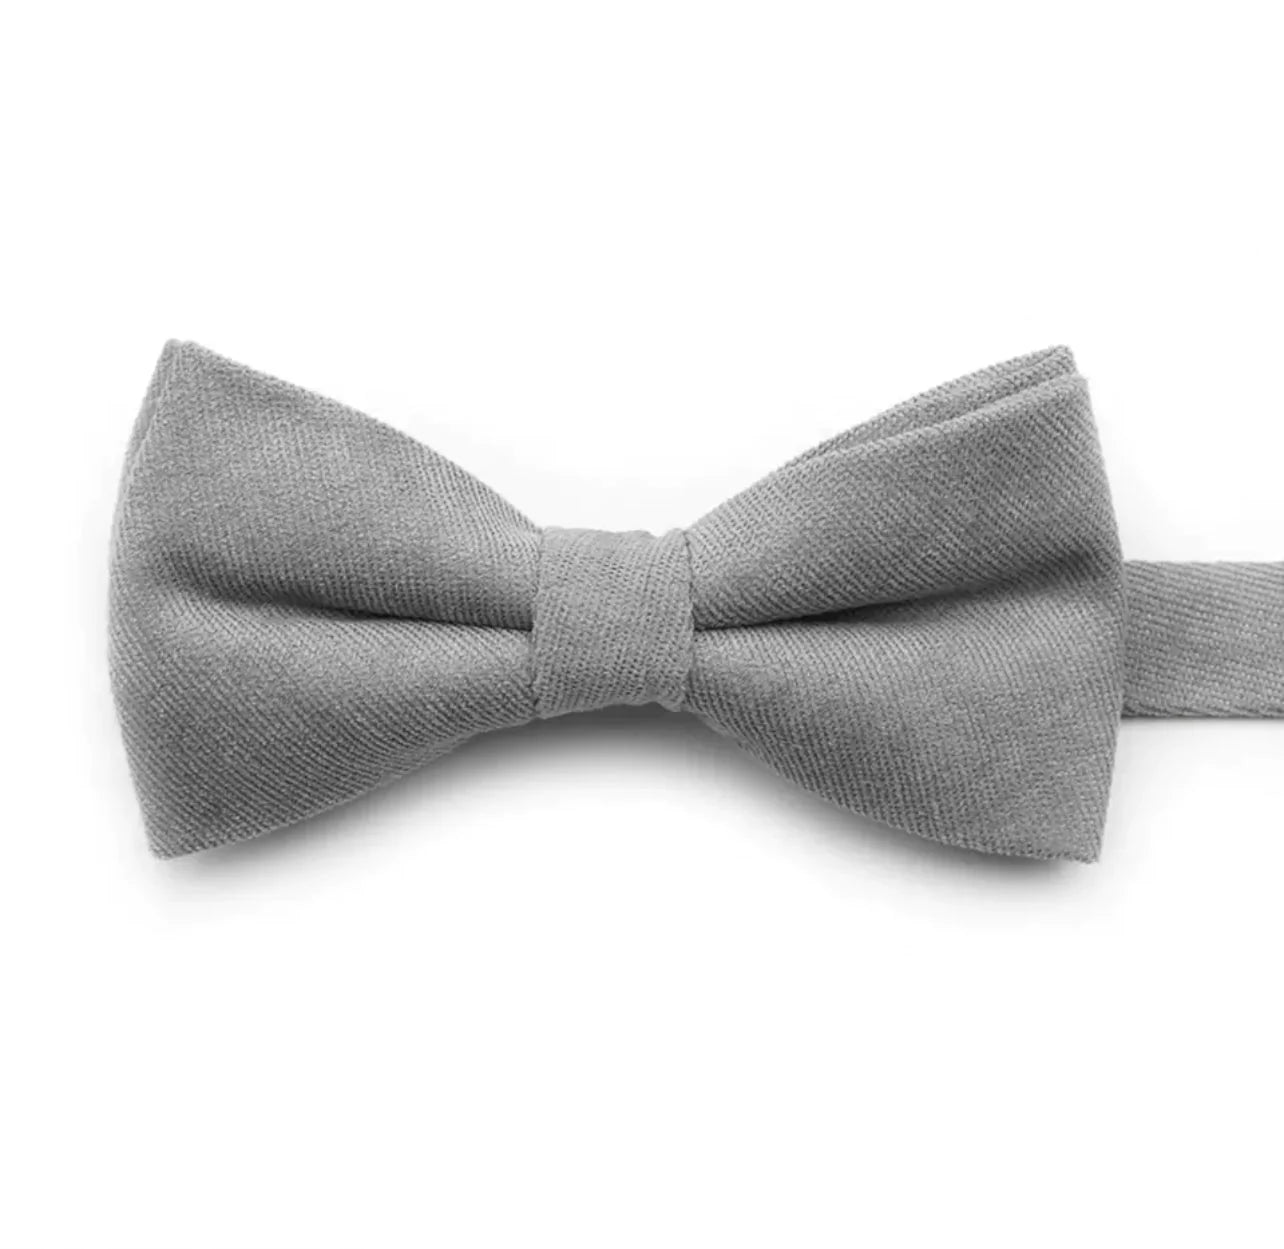 Gray Bow Tie for boys and kids (Pre-tied) - ASTOR - MYTIESHOP-Gray Bow Tie for boys and kids Bow Tie 10.5 * 6CMfor toddlers and kidsColor: Purple Gray Adjustable strap Color: Gray / Grey Great for: Ring bearers Children &amp; Boys Wedding Shoots Formal Prom Fancy Parties Gifts and presents gray bow tie for babies and children for weddings and events. Great for ring bearers. Fancy events. grey suede pre tied bow ties for toddlers kids. gray bow tie for kids weddings and events Baby bow ties for boys 